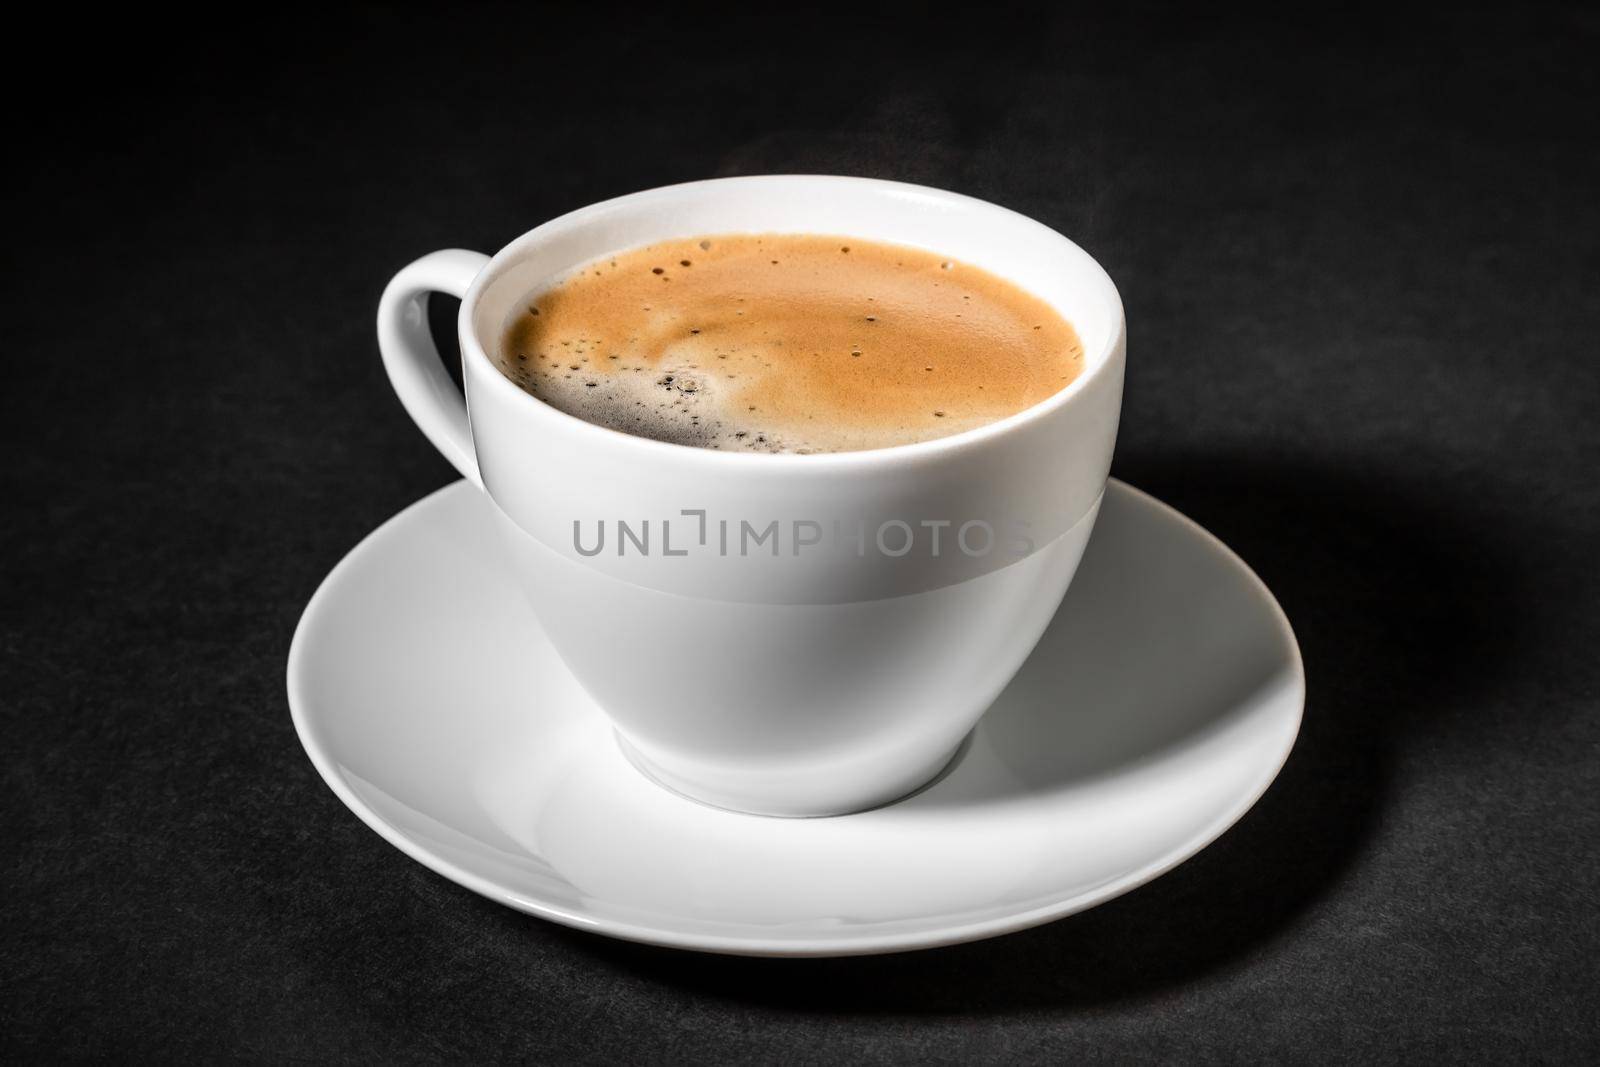 White cup of fresh black coffee on a dark background close-up